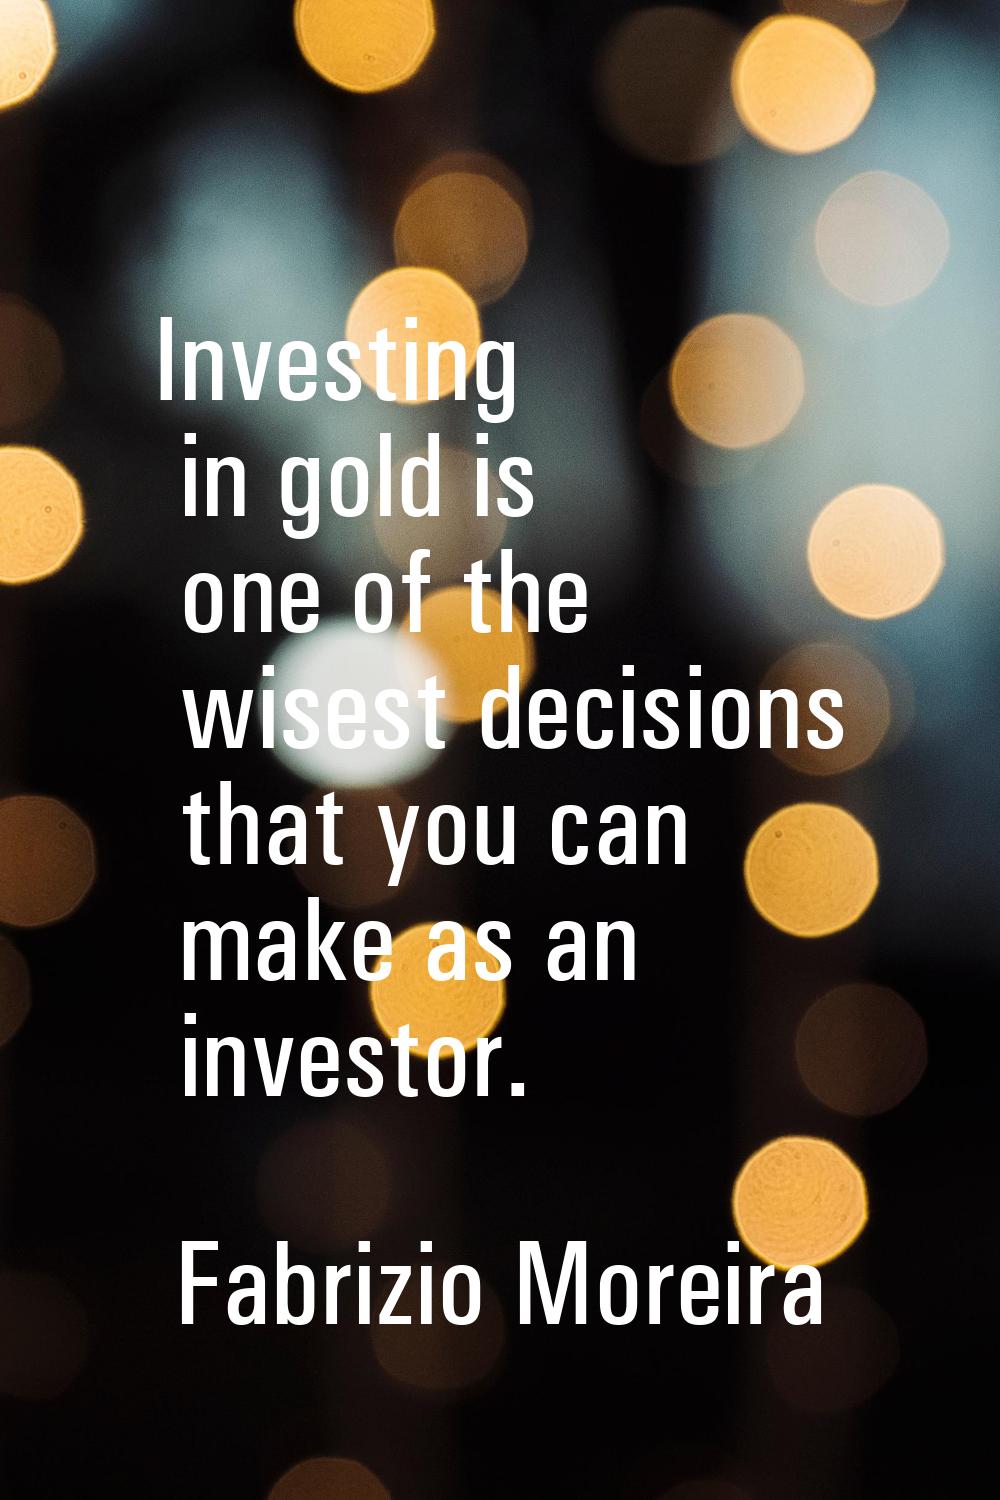 Investing in gold is one of the wisest decisions that you can make as an investor.